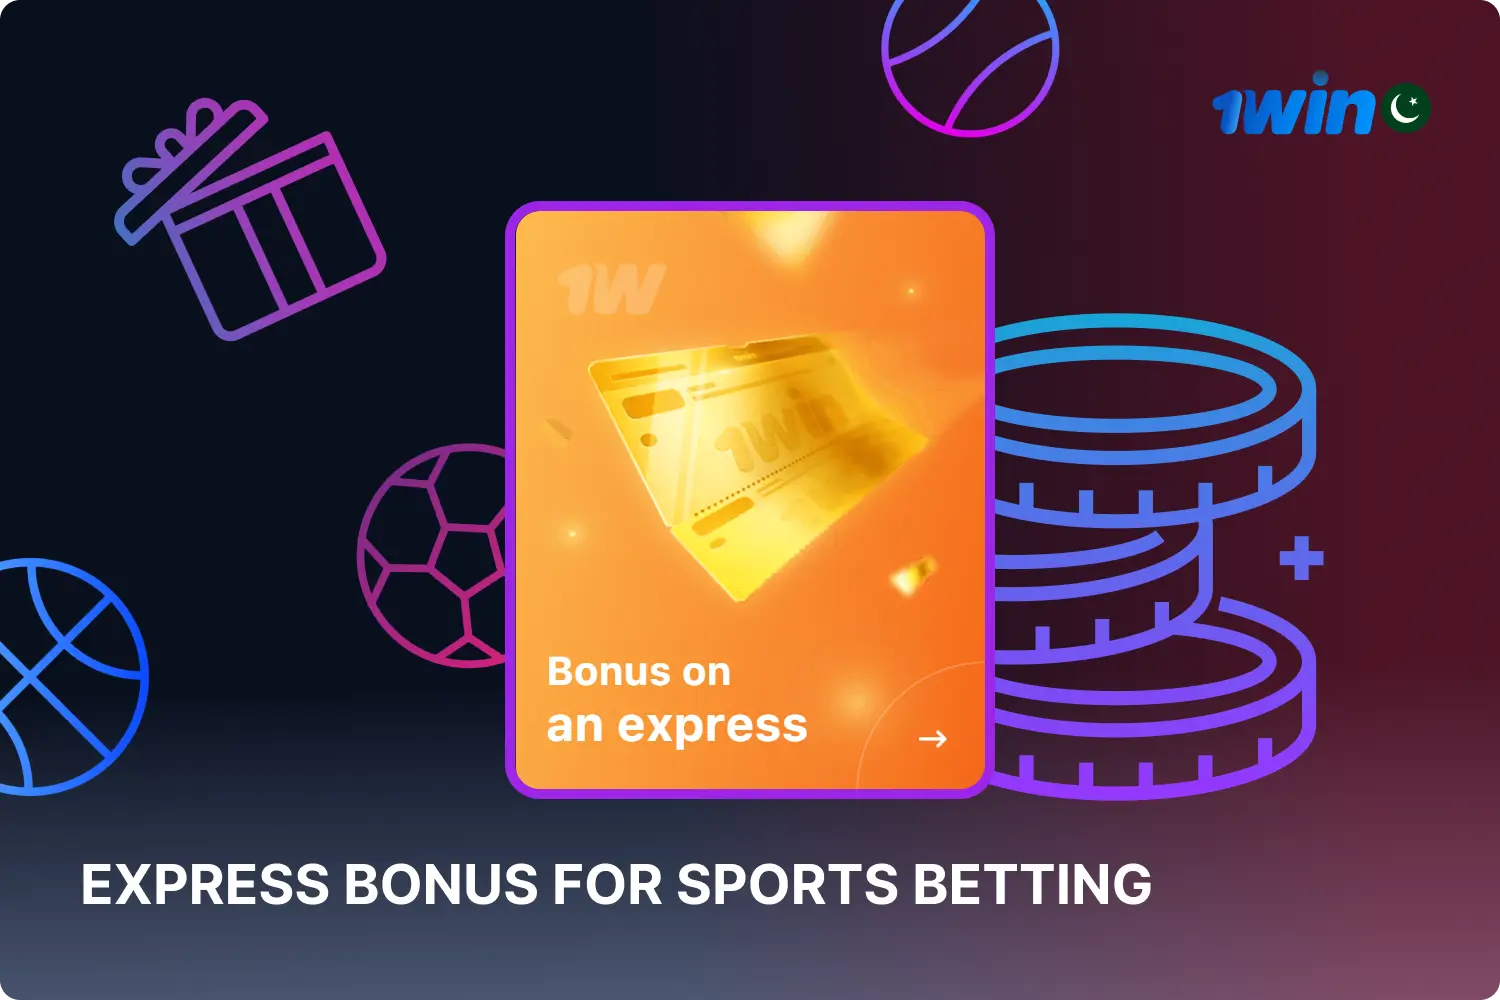 1win users who love sports betting can get a great bonus for express bets